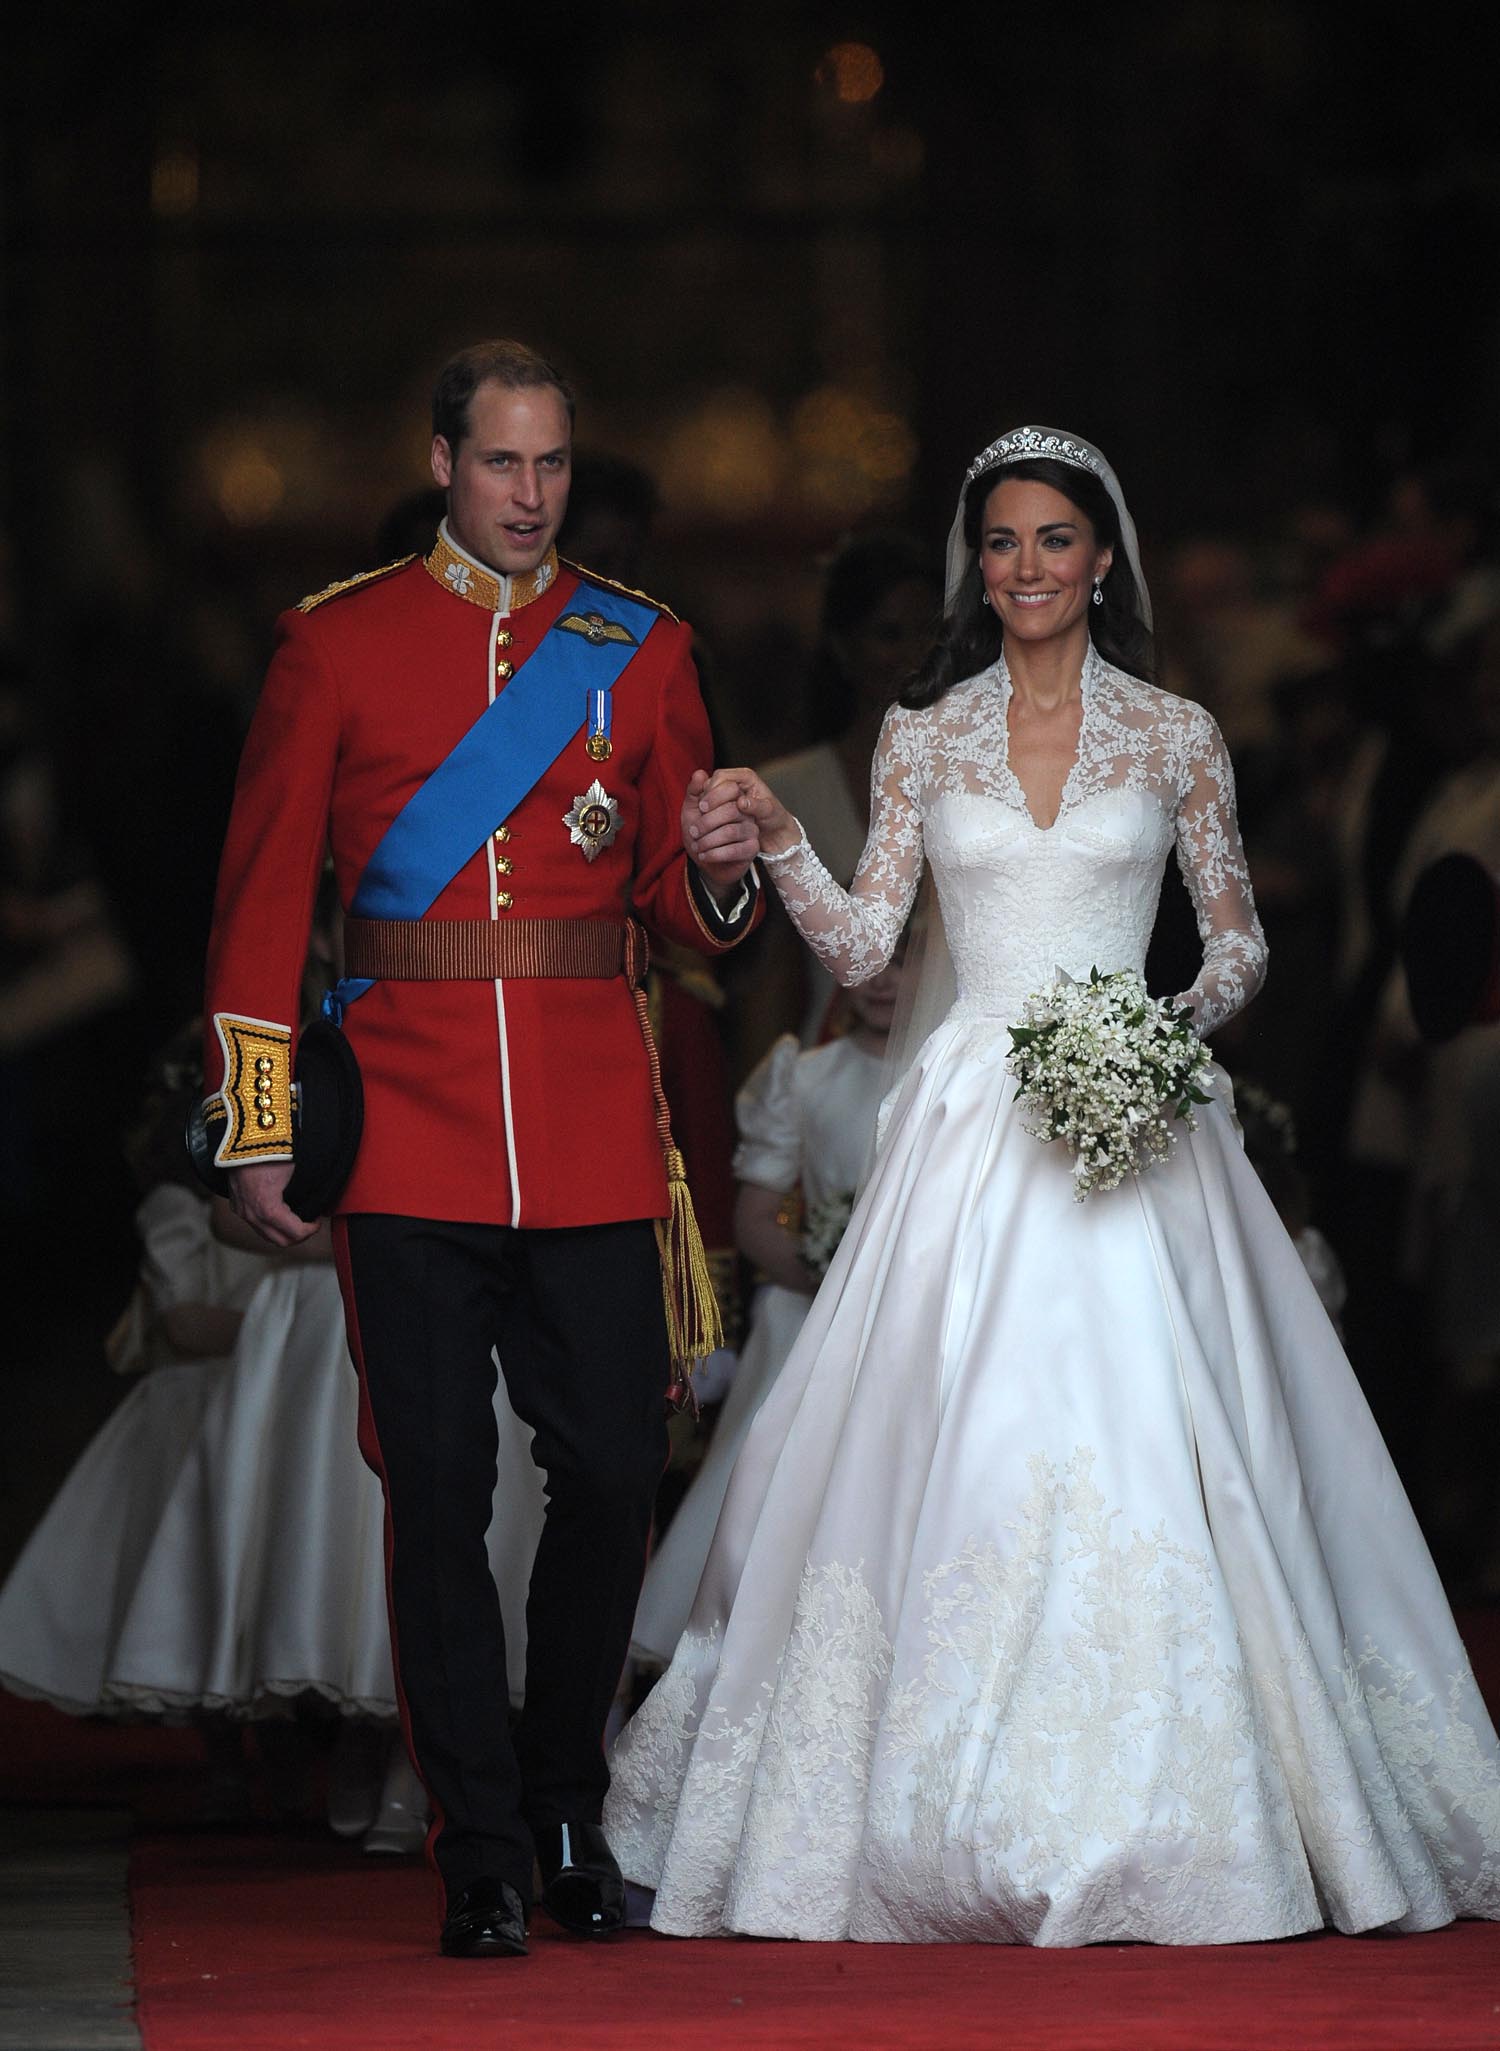 Catherine Marries her Prince Charming – The People’s Wedding